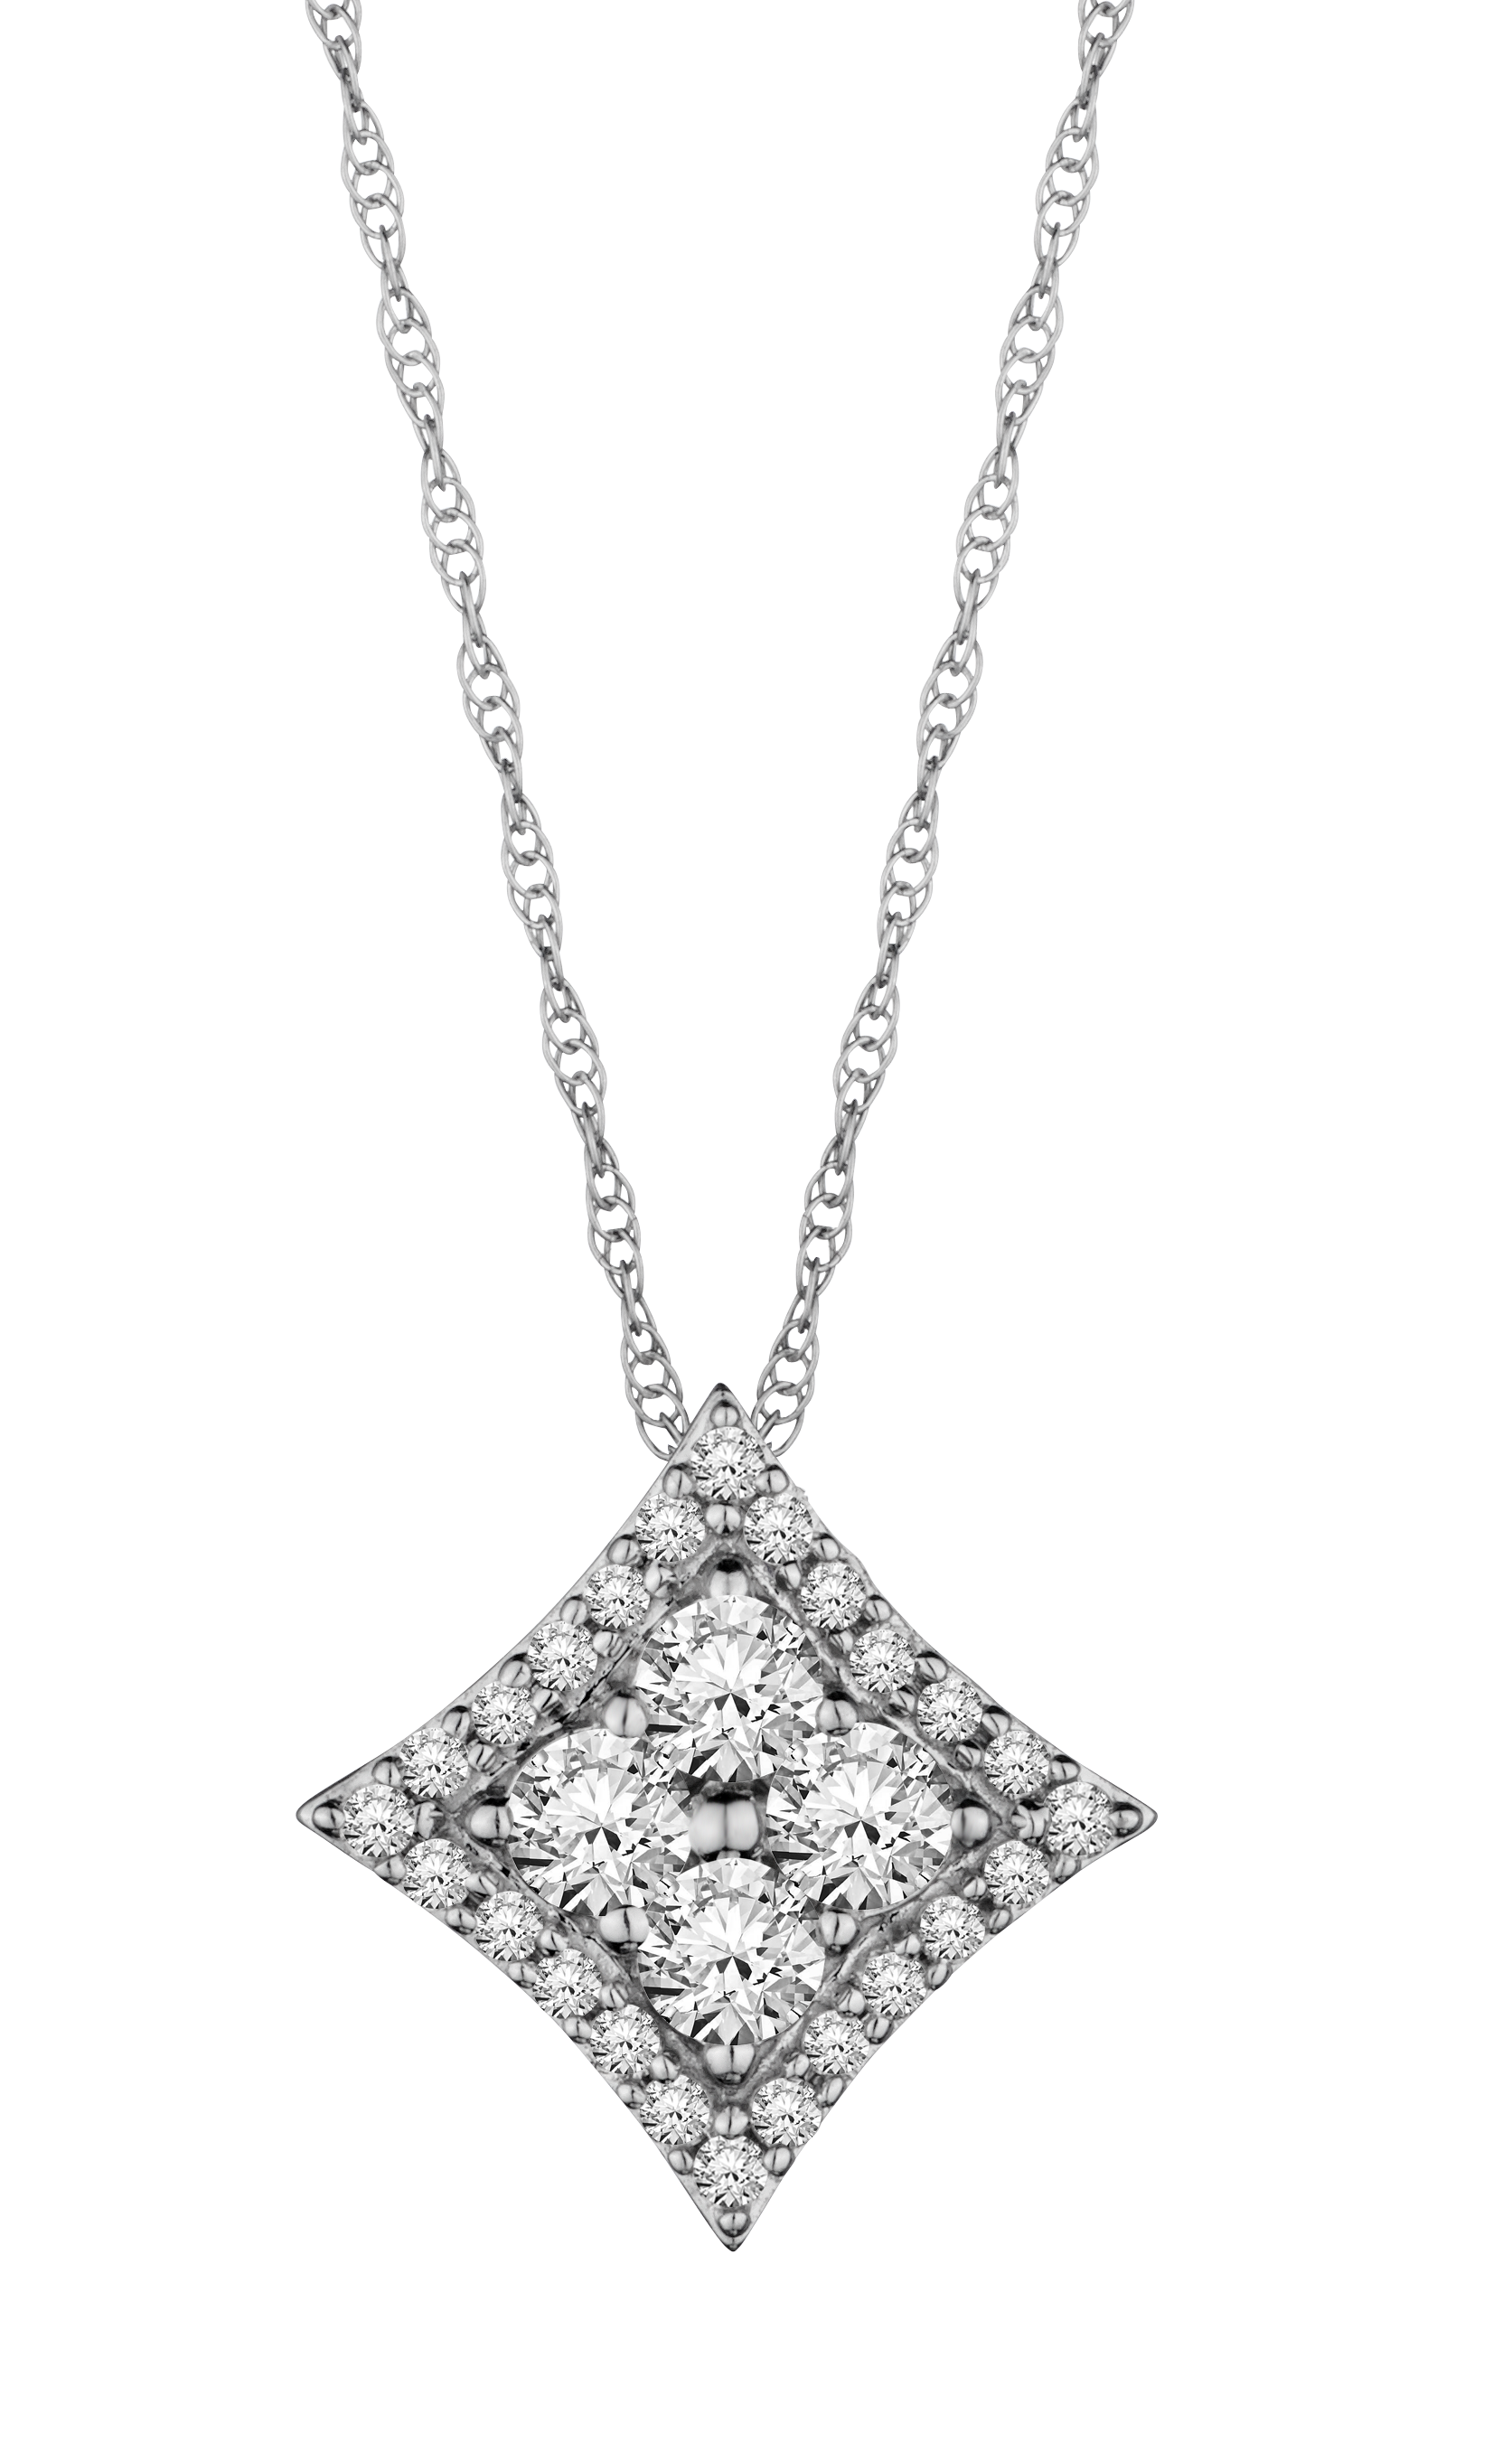 10kt White Gold, 1.00 Carat of Diamonds, Earrings and Pendant Set.....................NOW